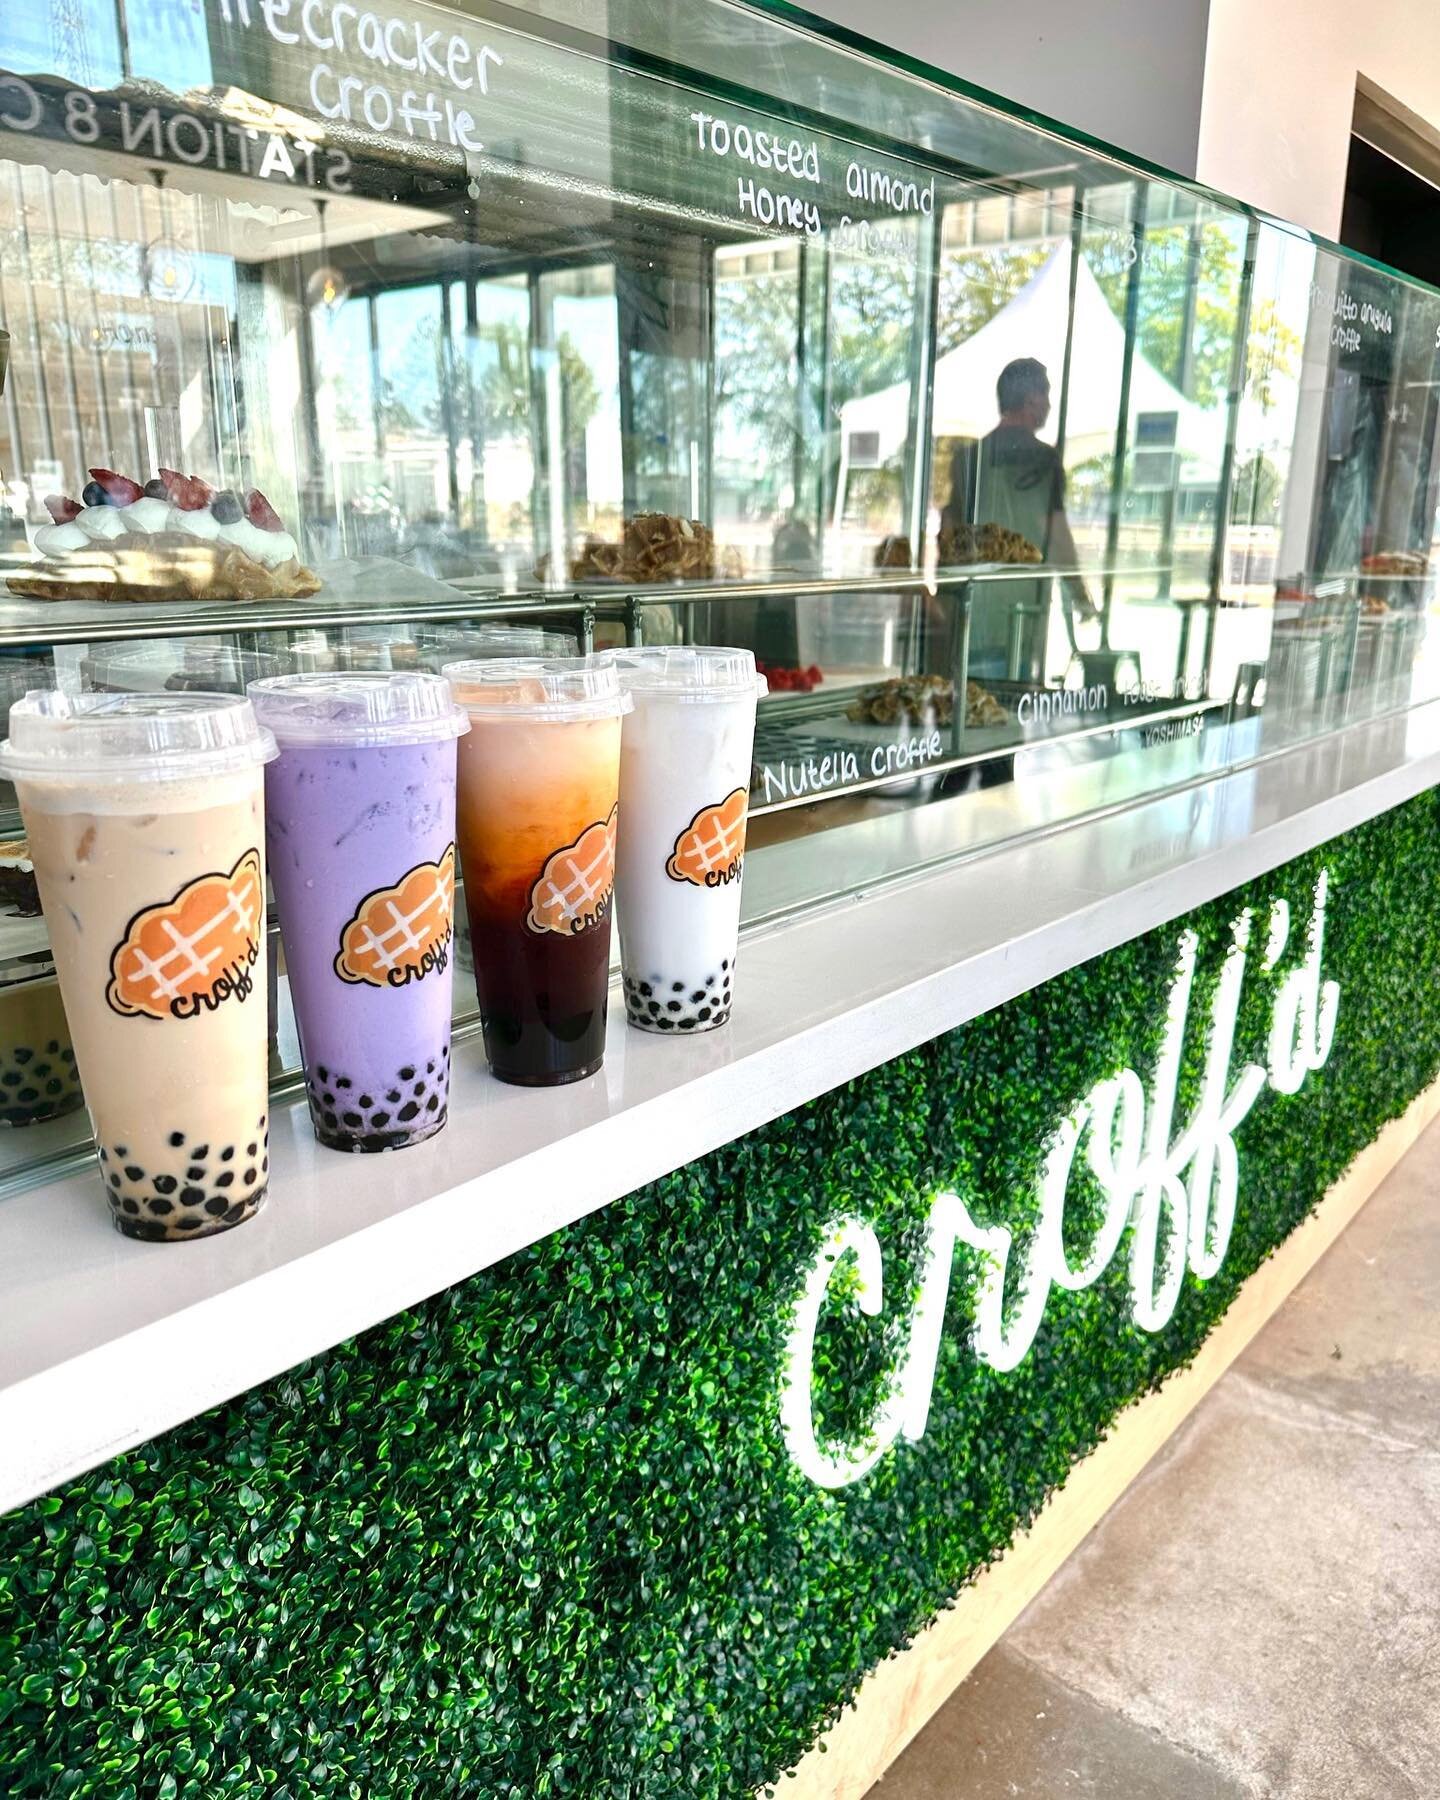 Stop by for your boba fix with our croffles 😍

⏰ Hours:
Thurs 12-8PM
Fri- Sat 12-9PM
Sun 12-8PM
📍Inside @railwayheightsmarket (8200 Washington Ave)
.
.
.
.
.
#houstondatenight #htxfood #htxfoods #365houston #ighouston #houstonhotspots #houstoneatth